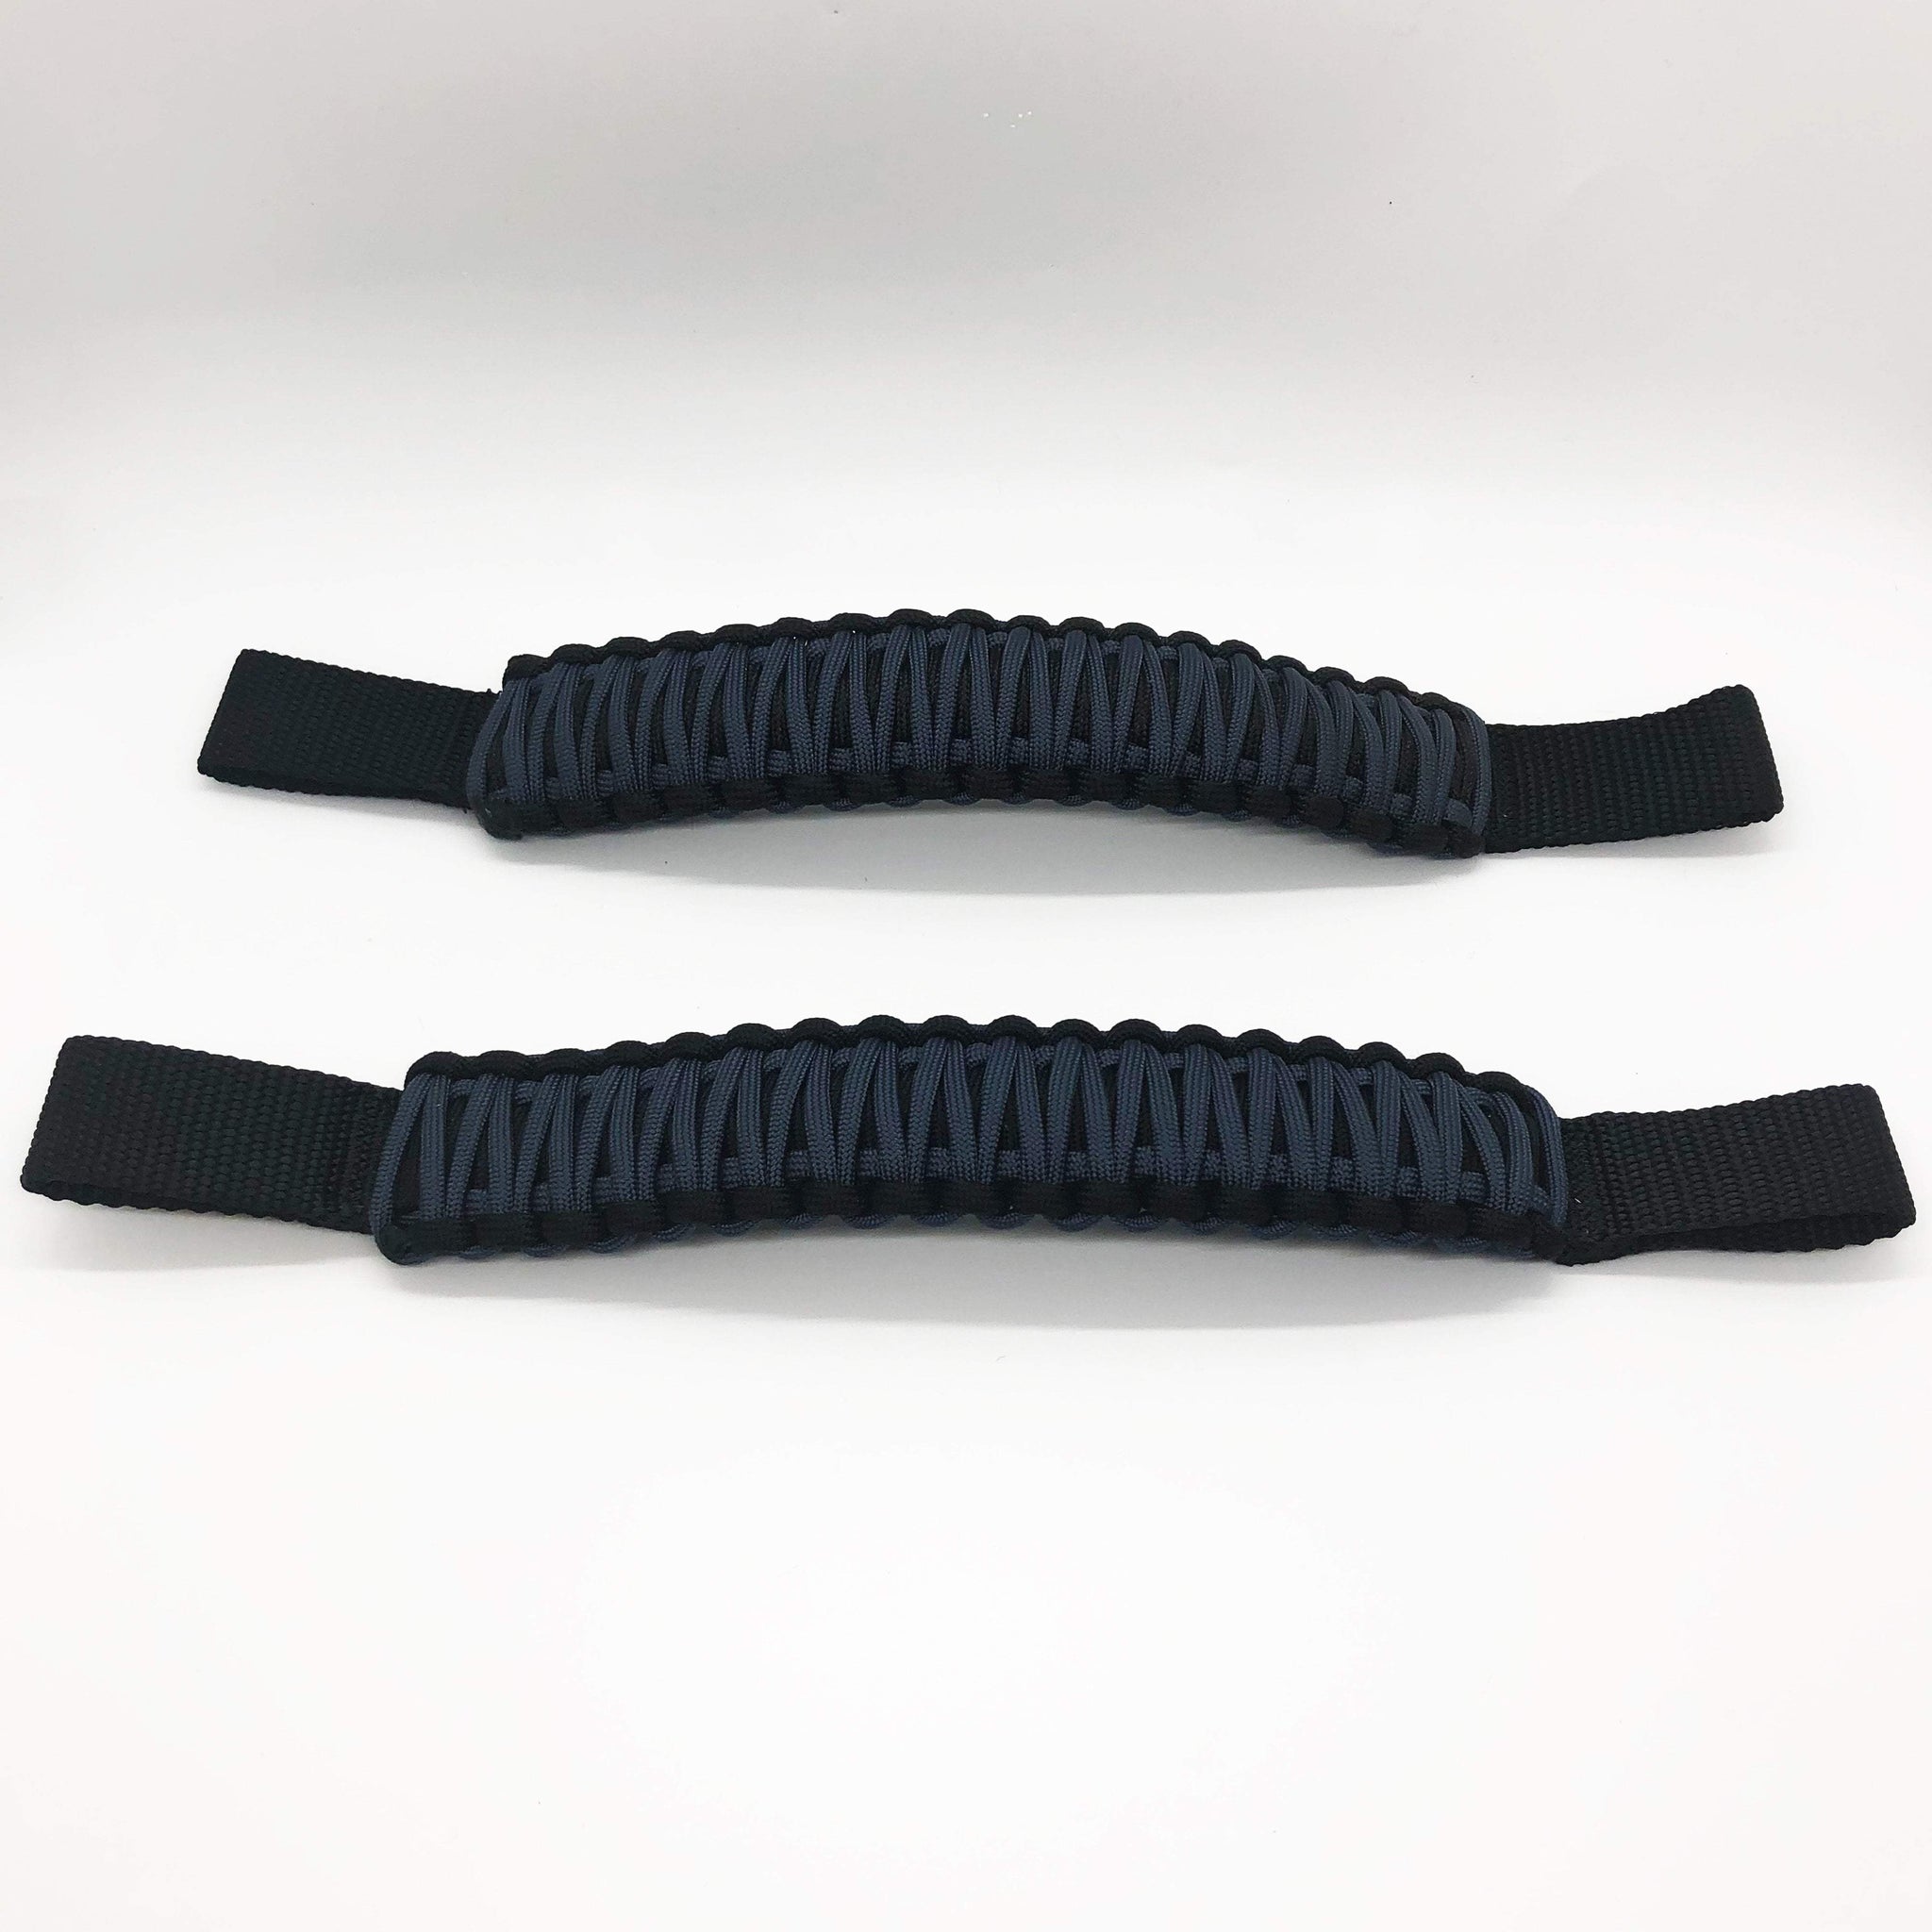 Bartact Paracord Grab Handles for Headrests for Jeep Wrangler JK, JKU, JL, JLU, Gladiator, Toyota Tacoma, Ford Bronco and Other Vehicles with Removable Head